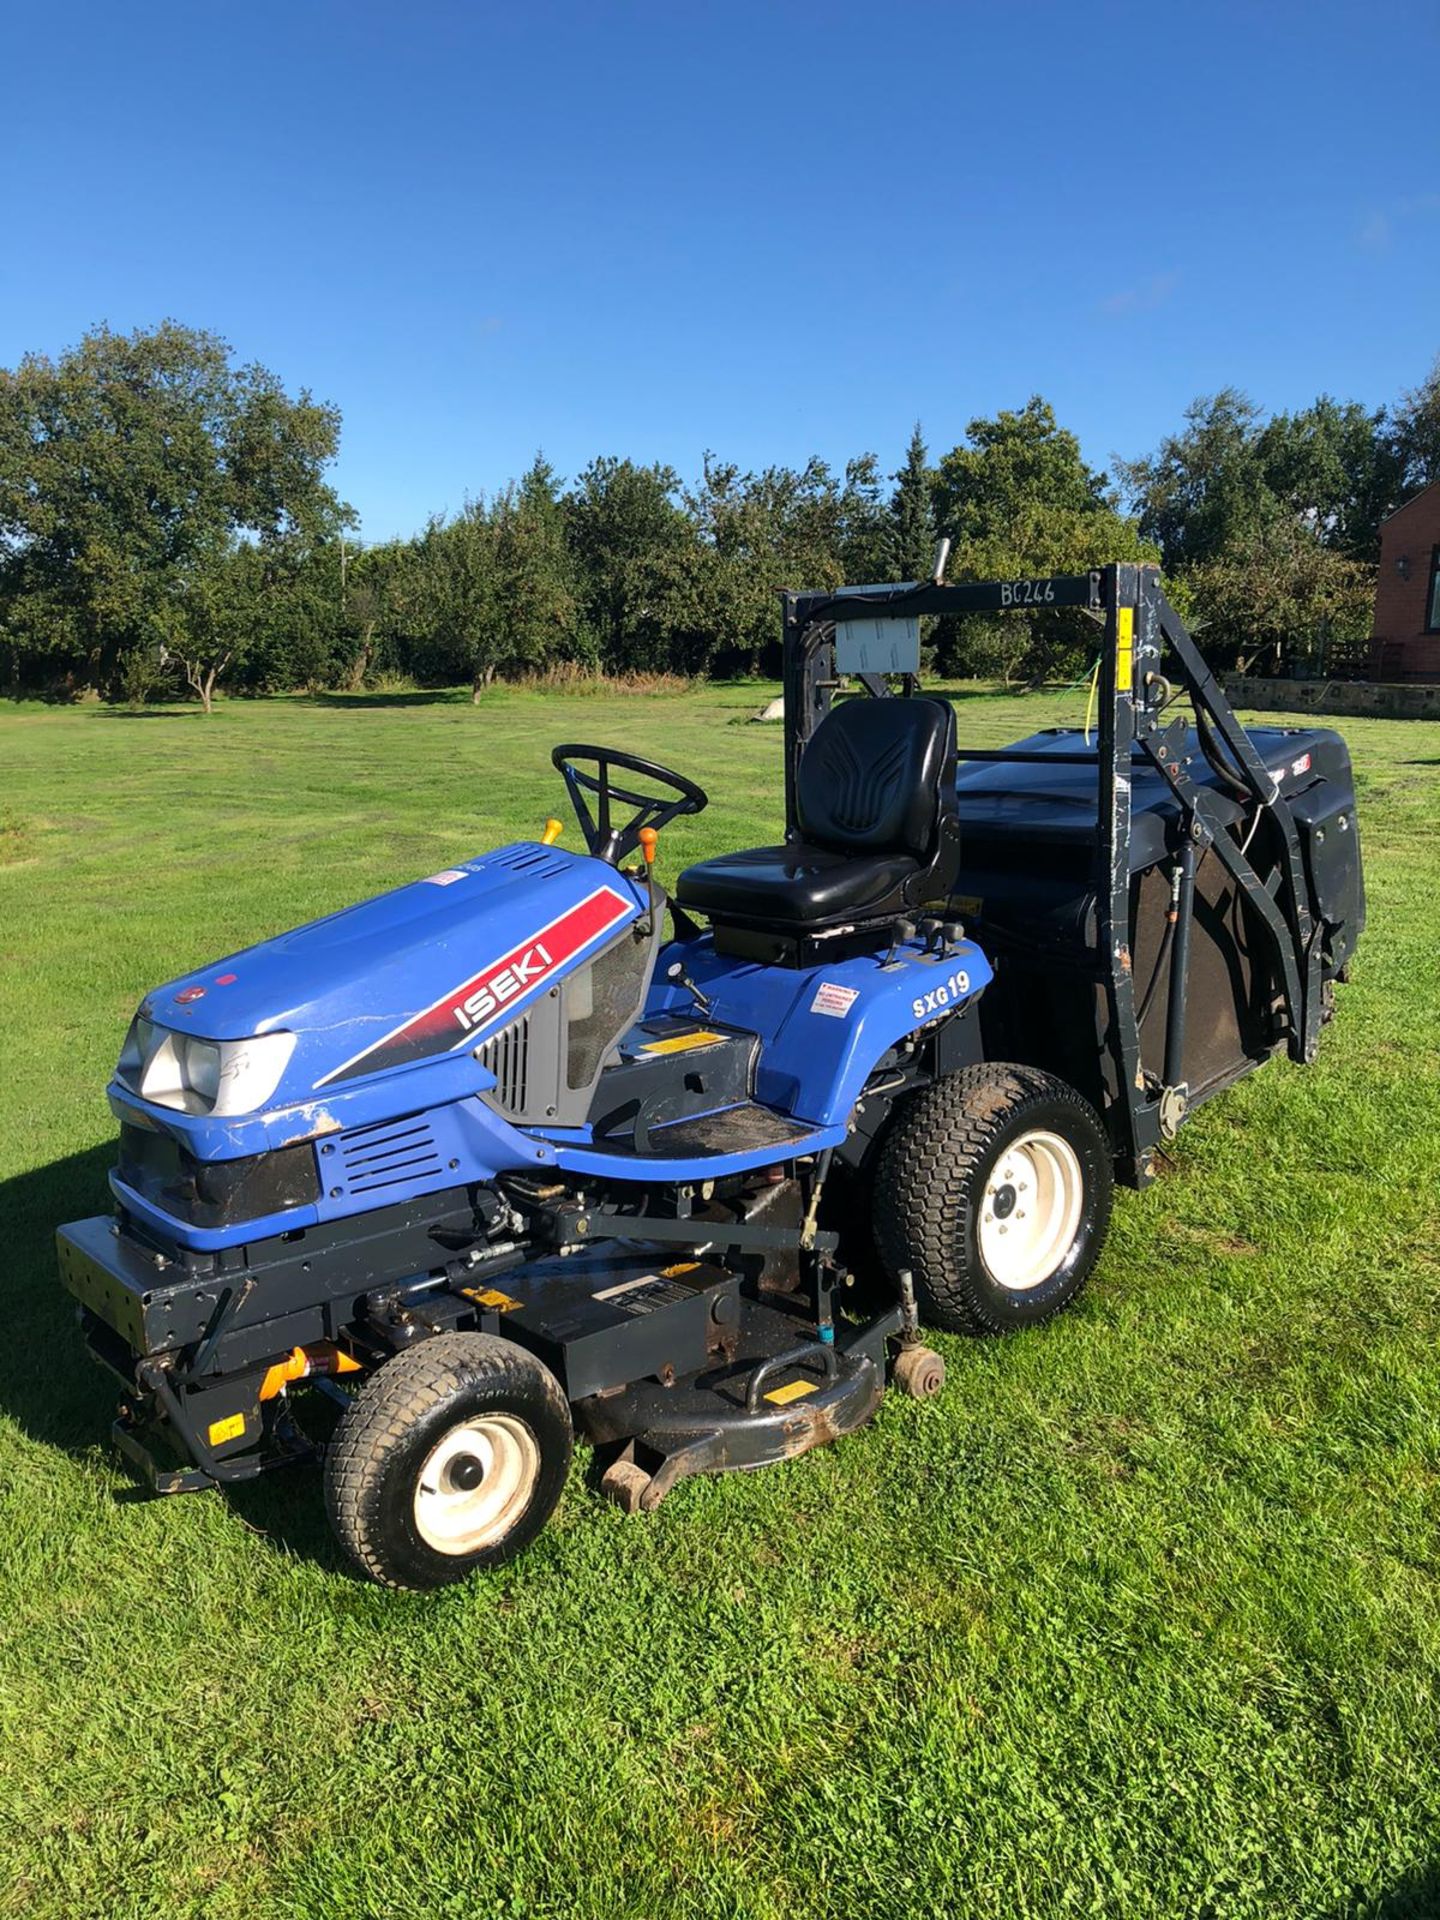 2011 ISEKI SXG19 RIDE ON LAWN MOWER, 1280 HOURS, RUNS, DRIVES AND CUTS, HIGH TIP COLLECTOR *PLUS VAT